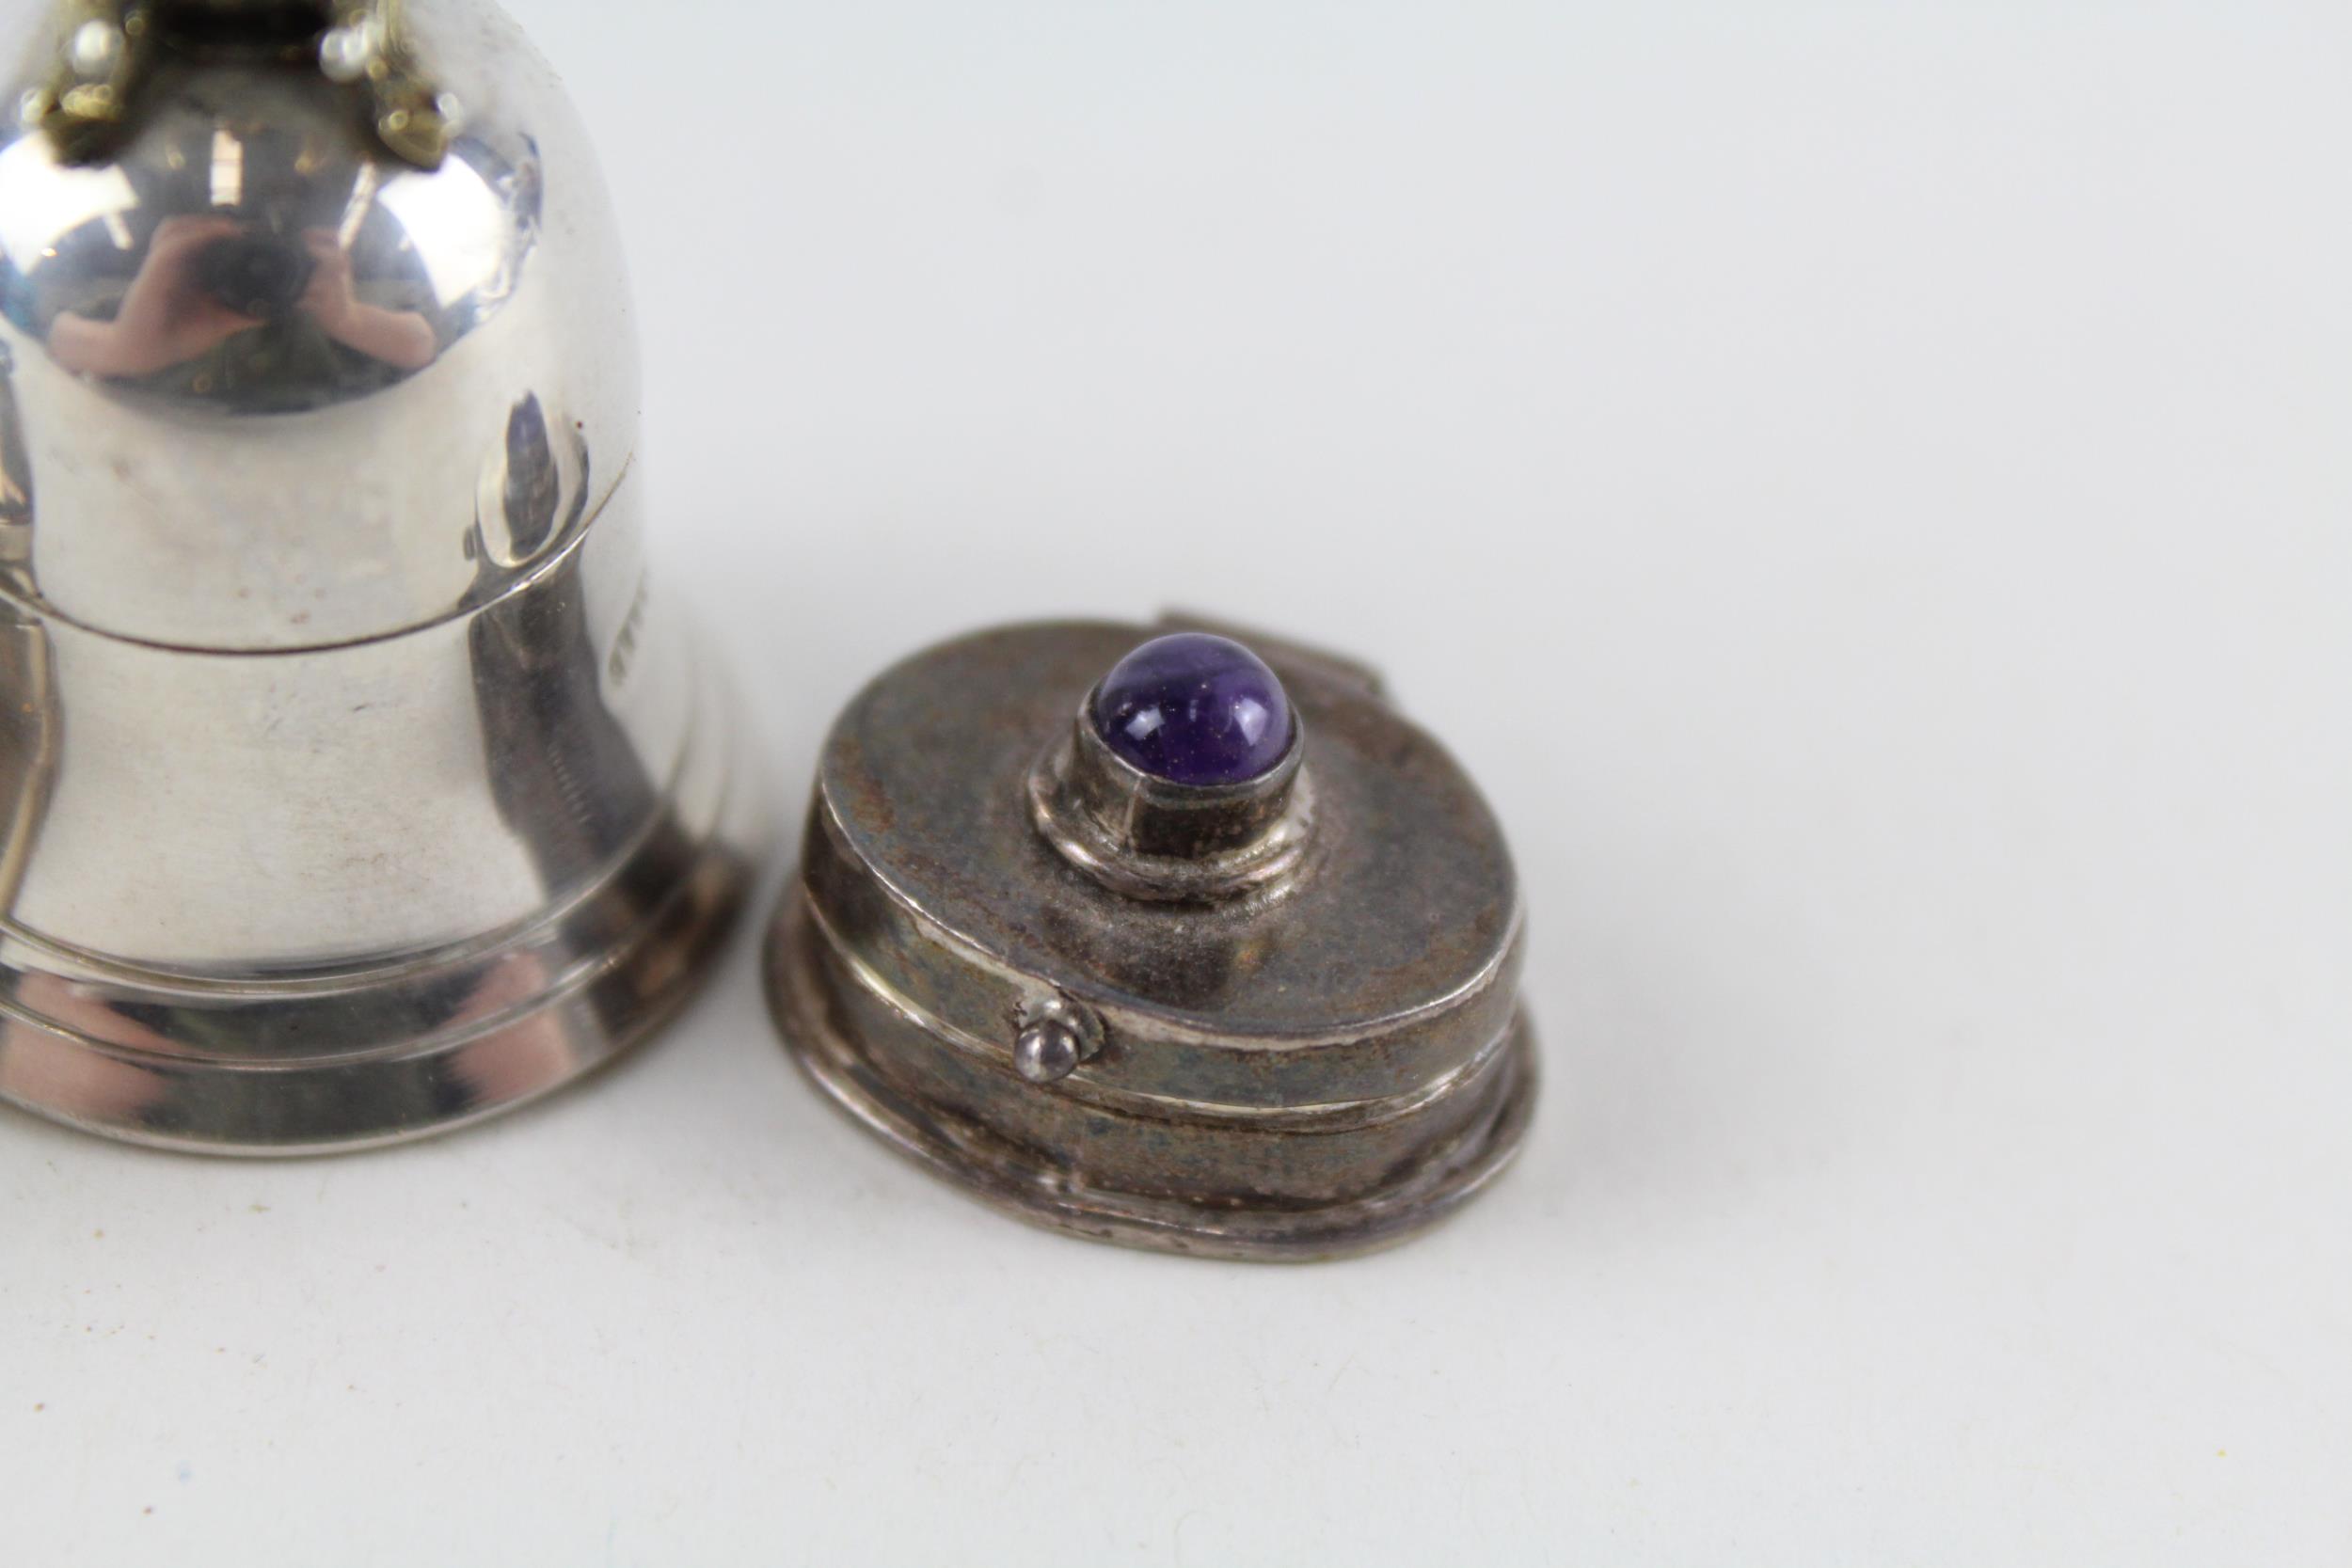 4 x Antique / Vintage Hallmarked .925 Sterling Silver Pill / Trinket Boxes (52g) - In antique / - Image 2 of 5